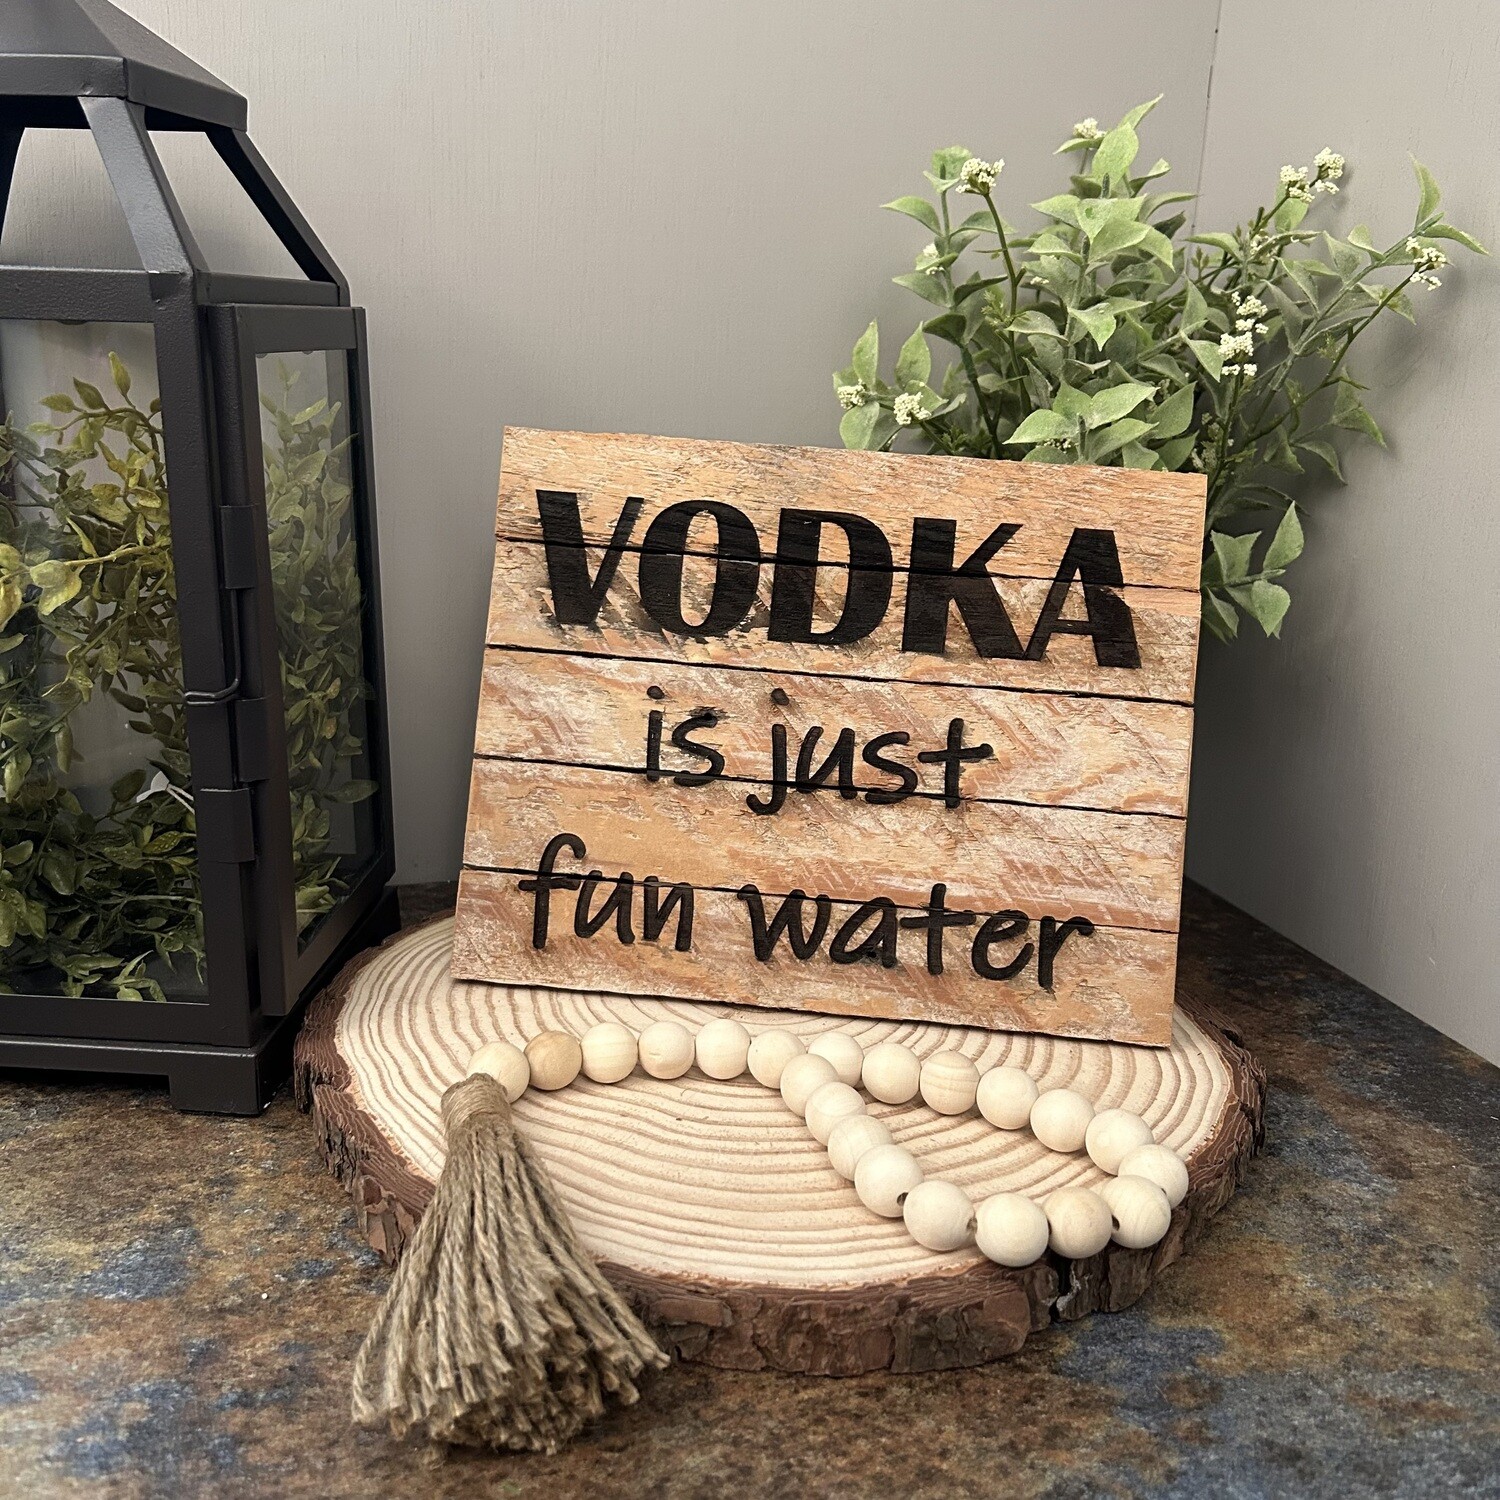 Vodka is just fun water - Lath sign